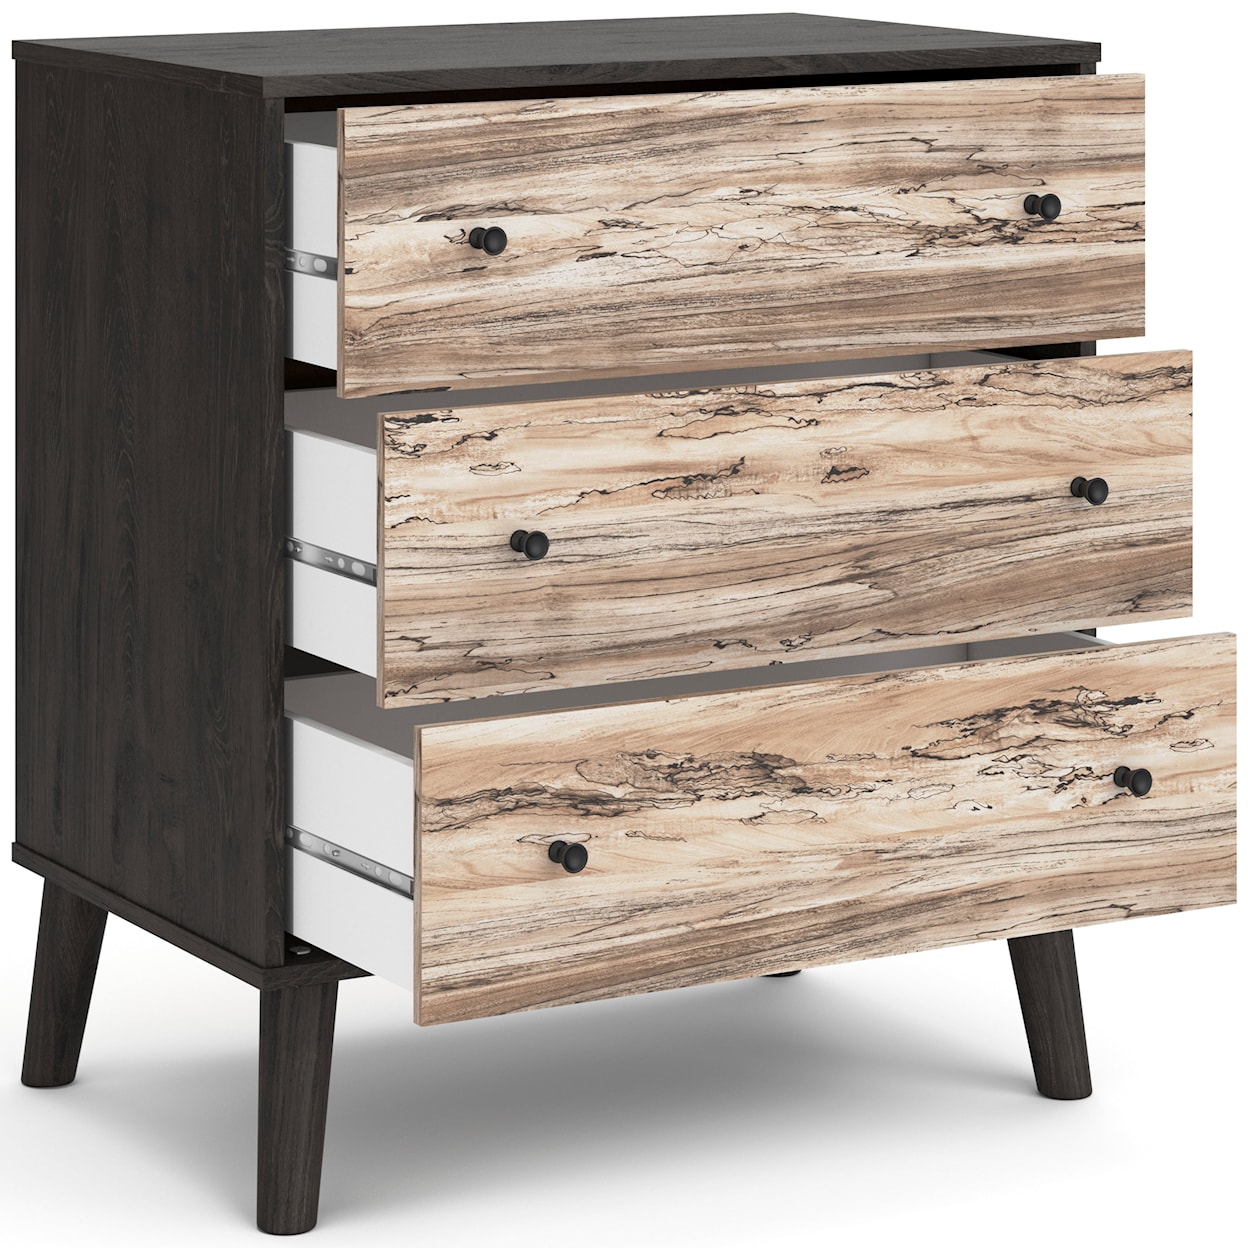 Michael Alan Select Lannover Chest of Drawers